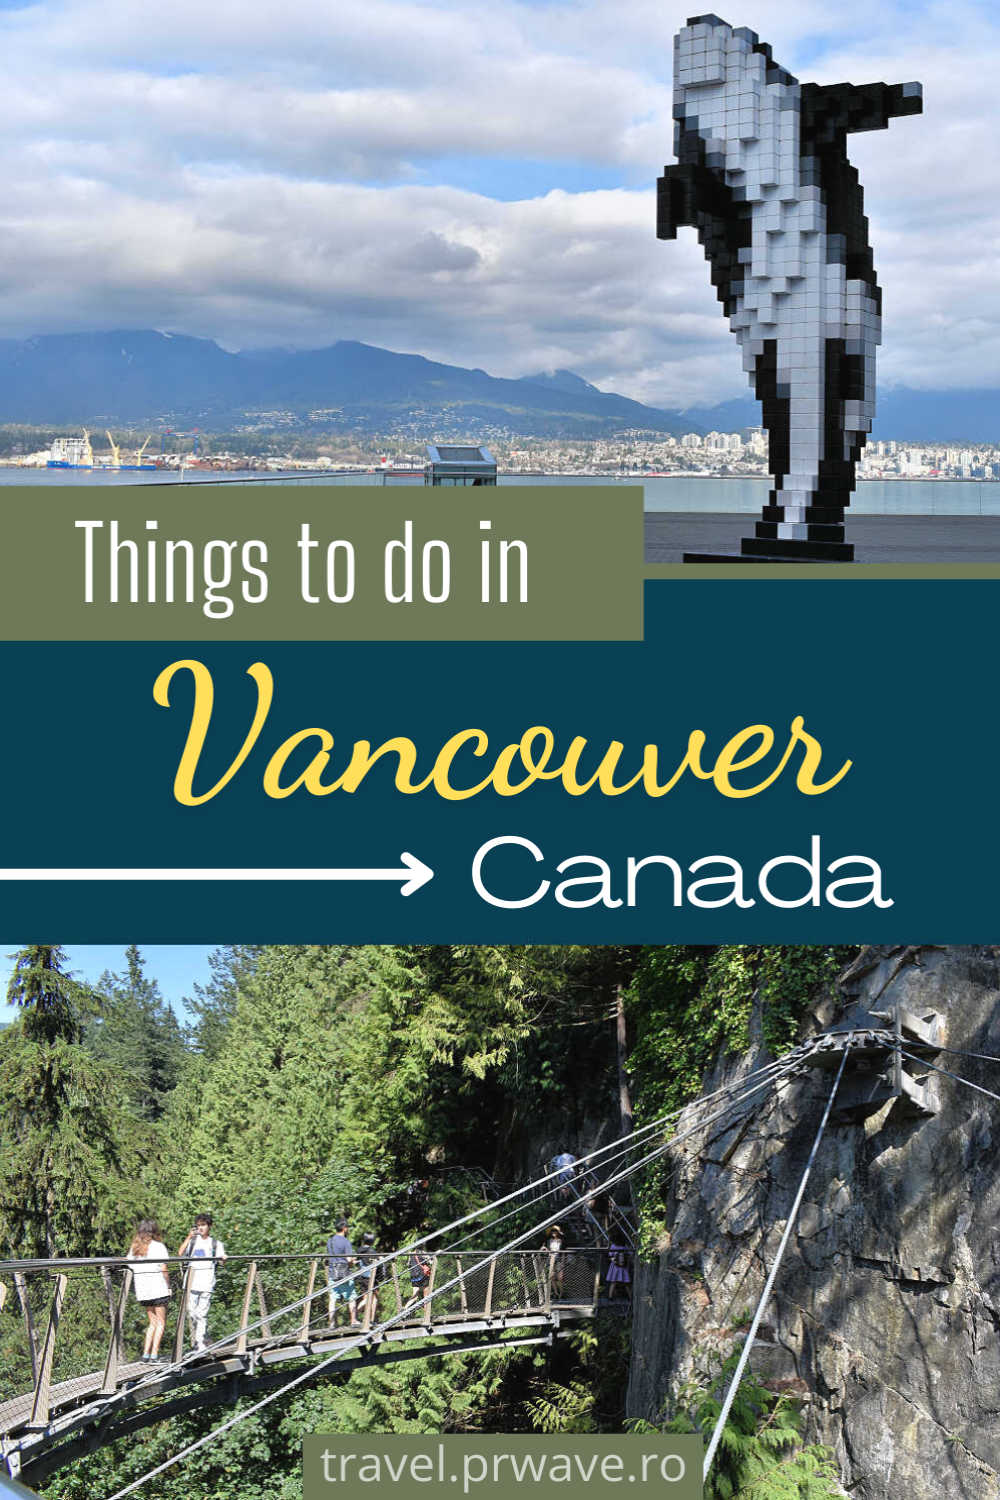 Things to do in Vancouver, Canada. Read this Vancouver guide to discover the best Vancouver attractions and useful tips for visiting Vancouver from a local. #vancouver #canada #vancouverthingstodo #northamerica #traveldestinations #vancouverguide